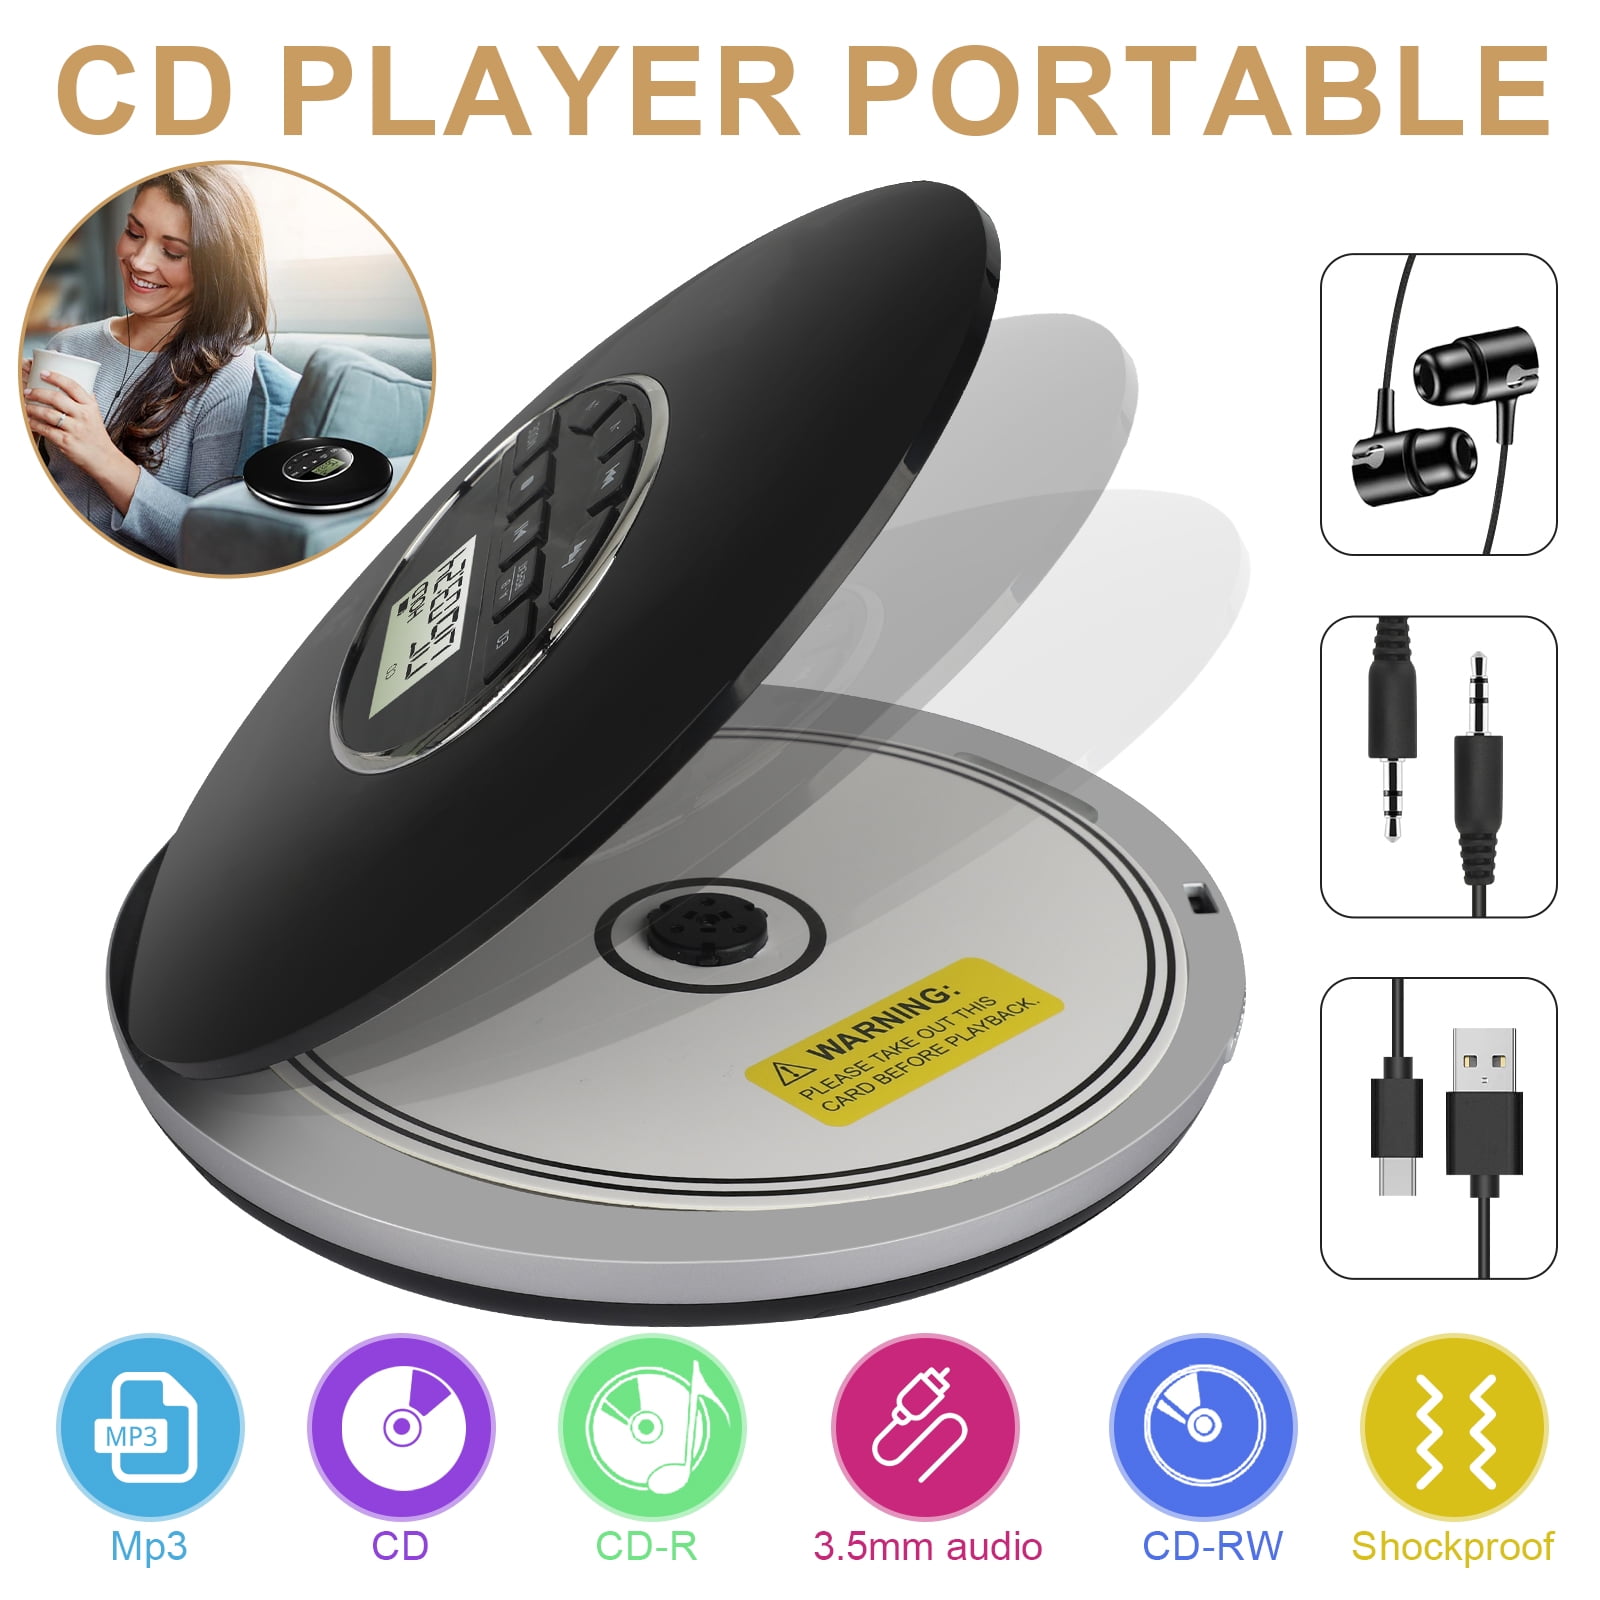 HOTT Personal Compact Disc Player Small Music CD Walkman with Anti-Skip Protection for Cars Adults Kids Students Portable CD Player with Headphone and 3.5mm Audio Cable 